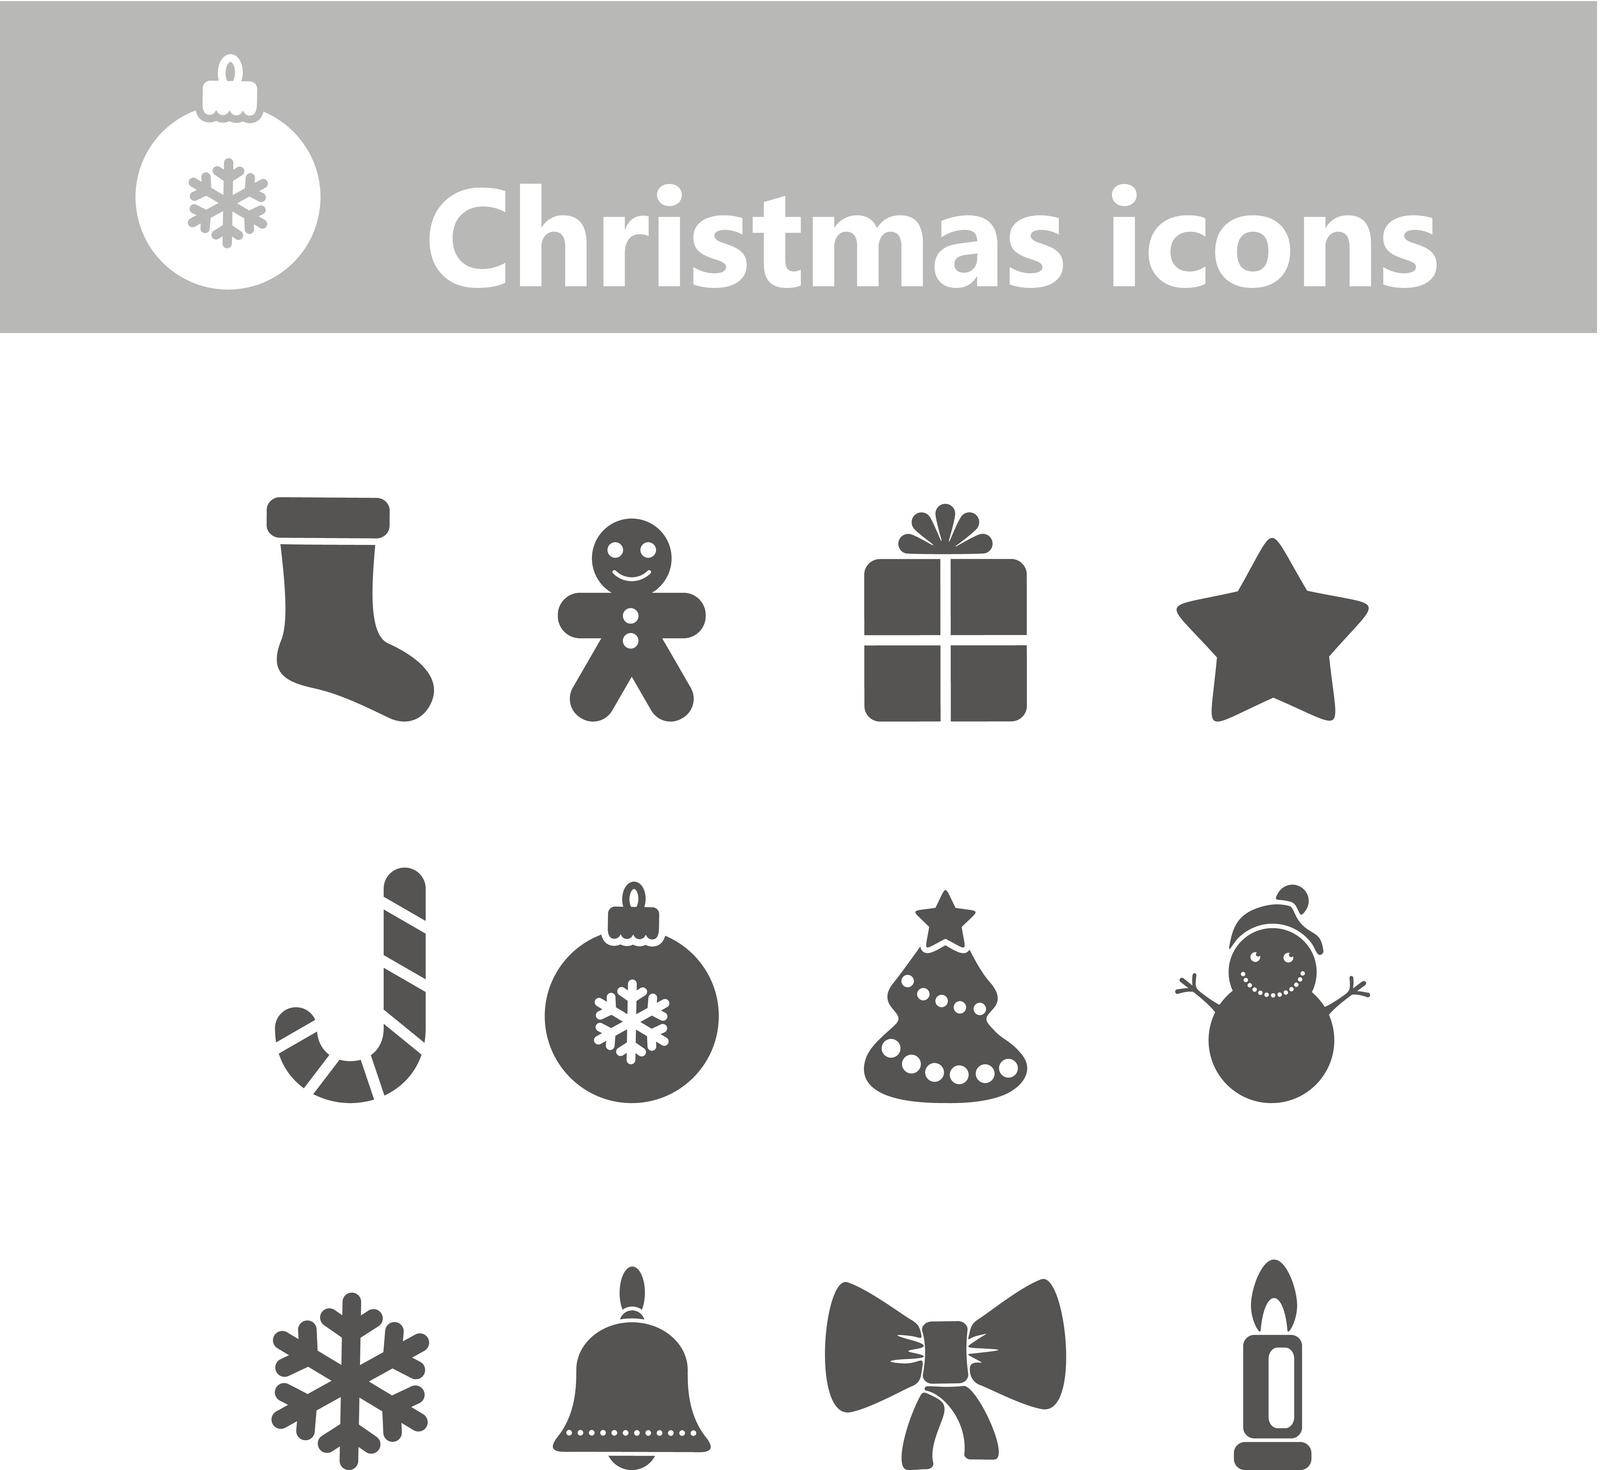 Christmas icons by nosik